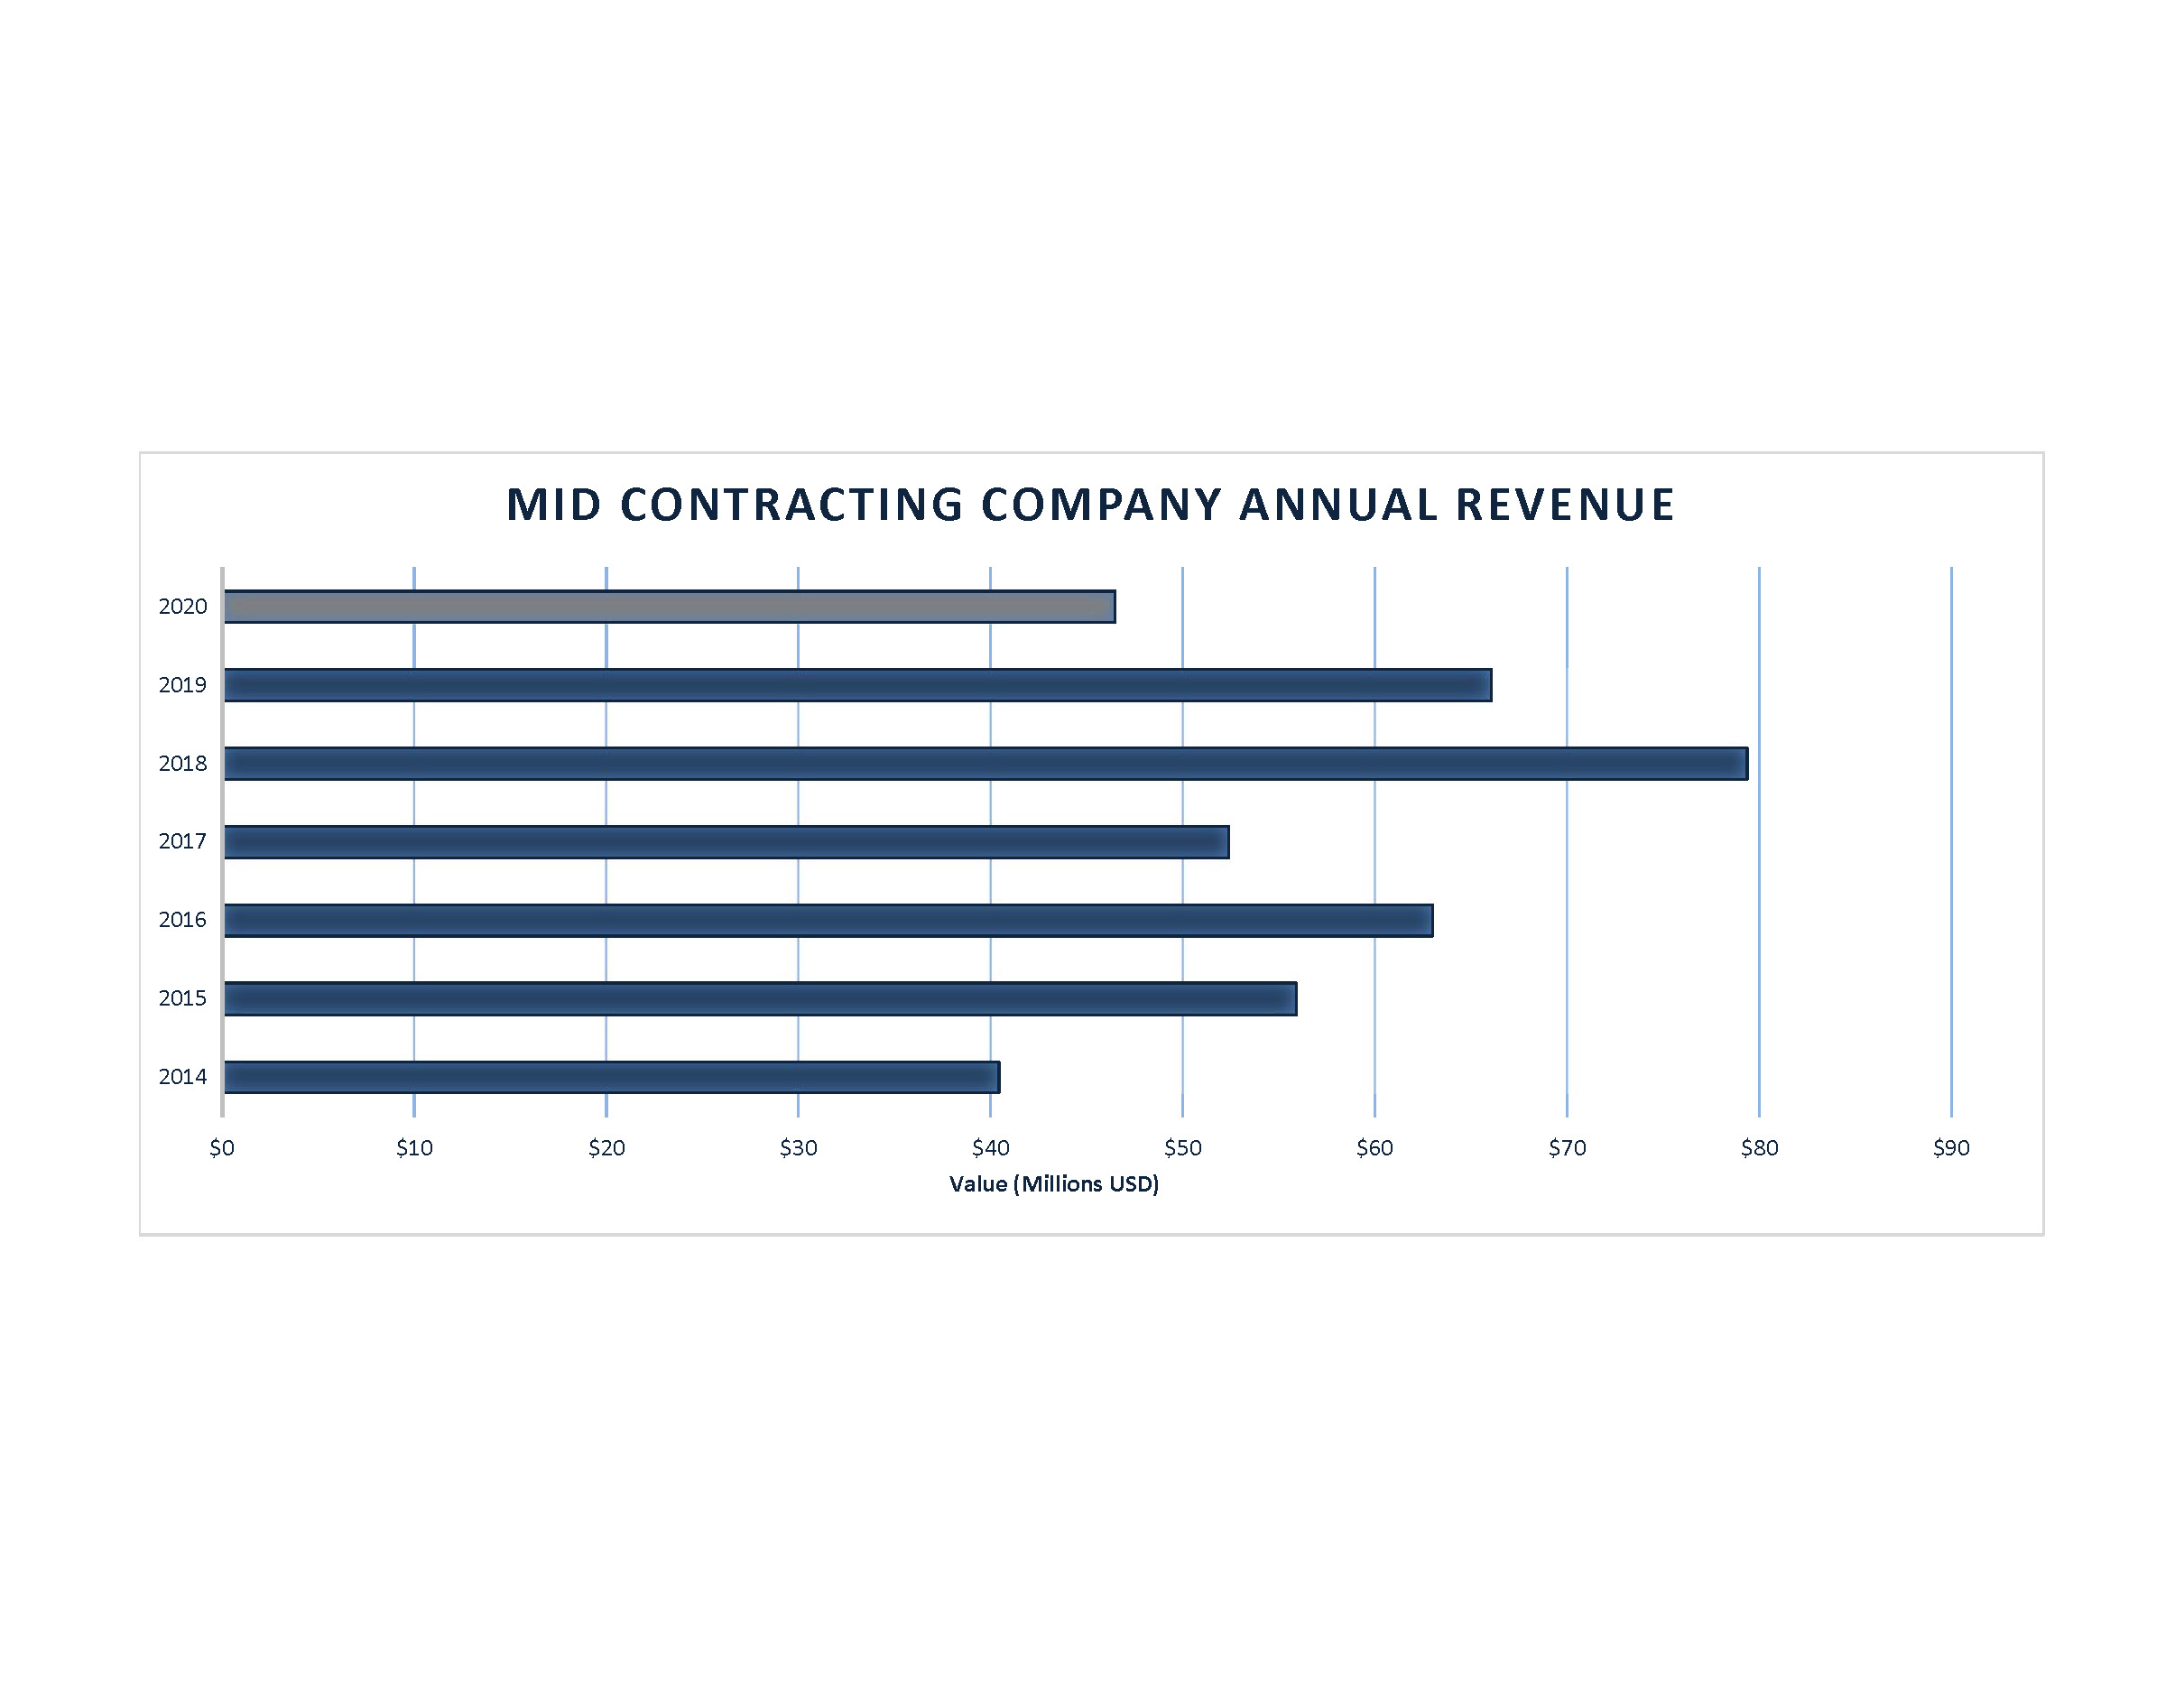 MID Contracting Company Annual Revenue is demonstrated in the following chart: